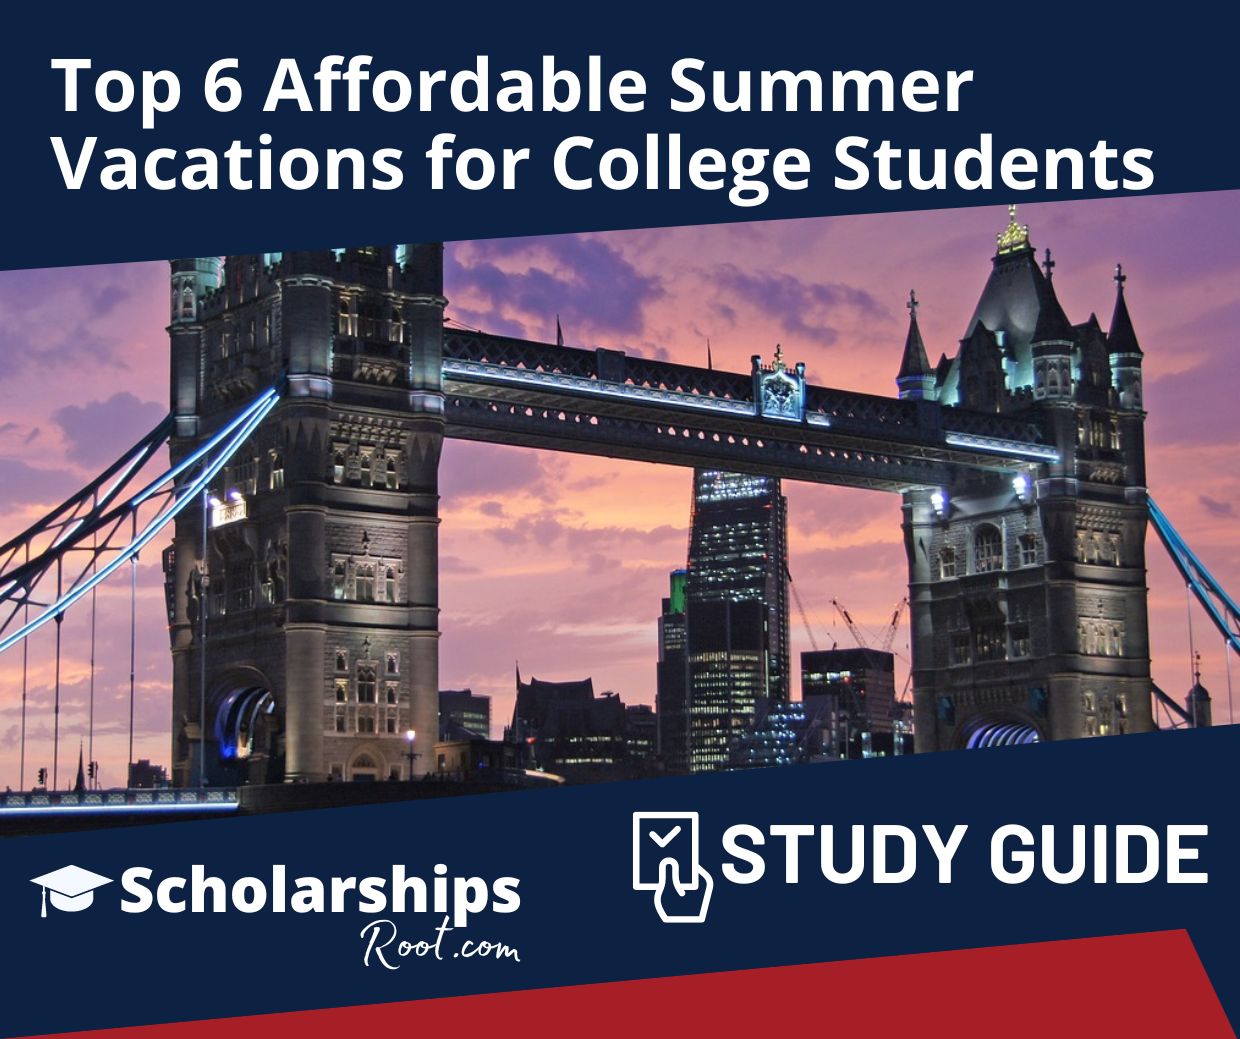 Top 6 Affordable Summer Vacations for College Students